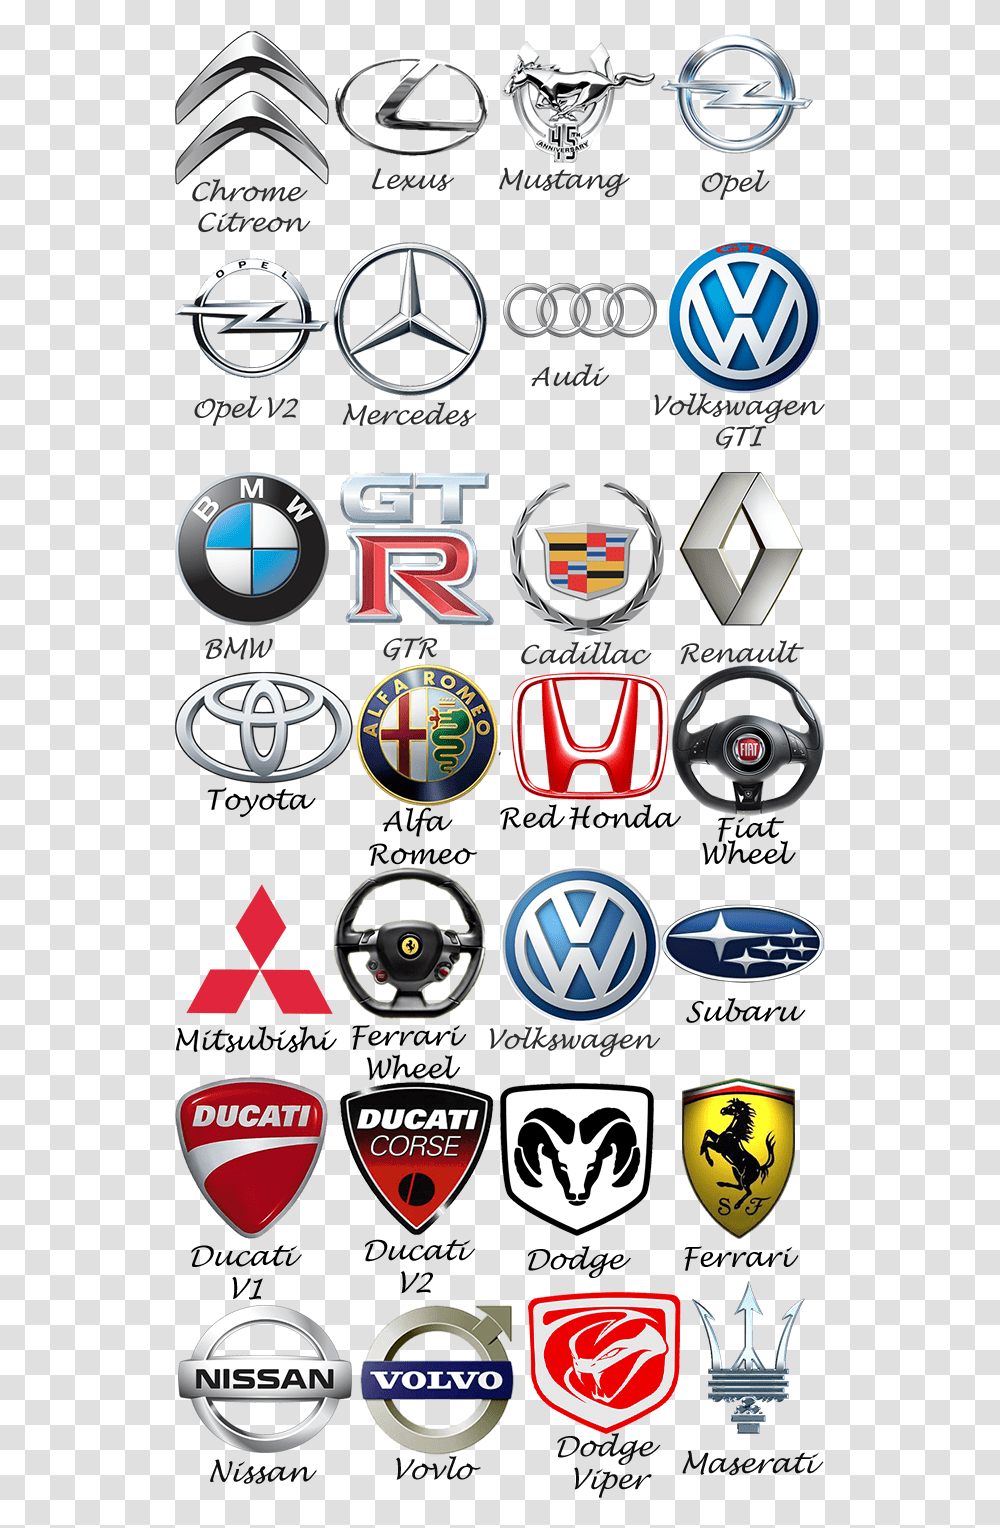 Cars And Their Names List Logo Car Logos And Names List, Symbol, Clock Tower, Architecture, Building Transparent Png